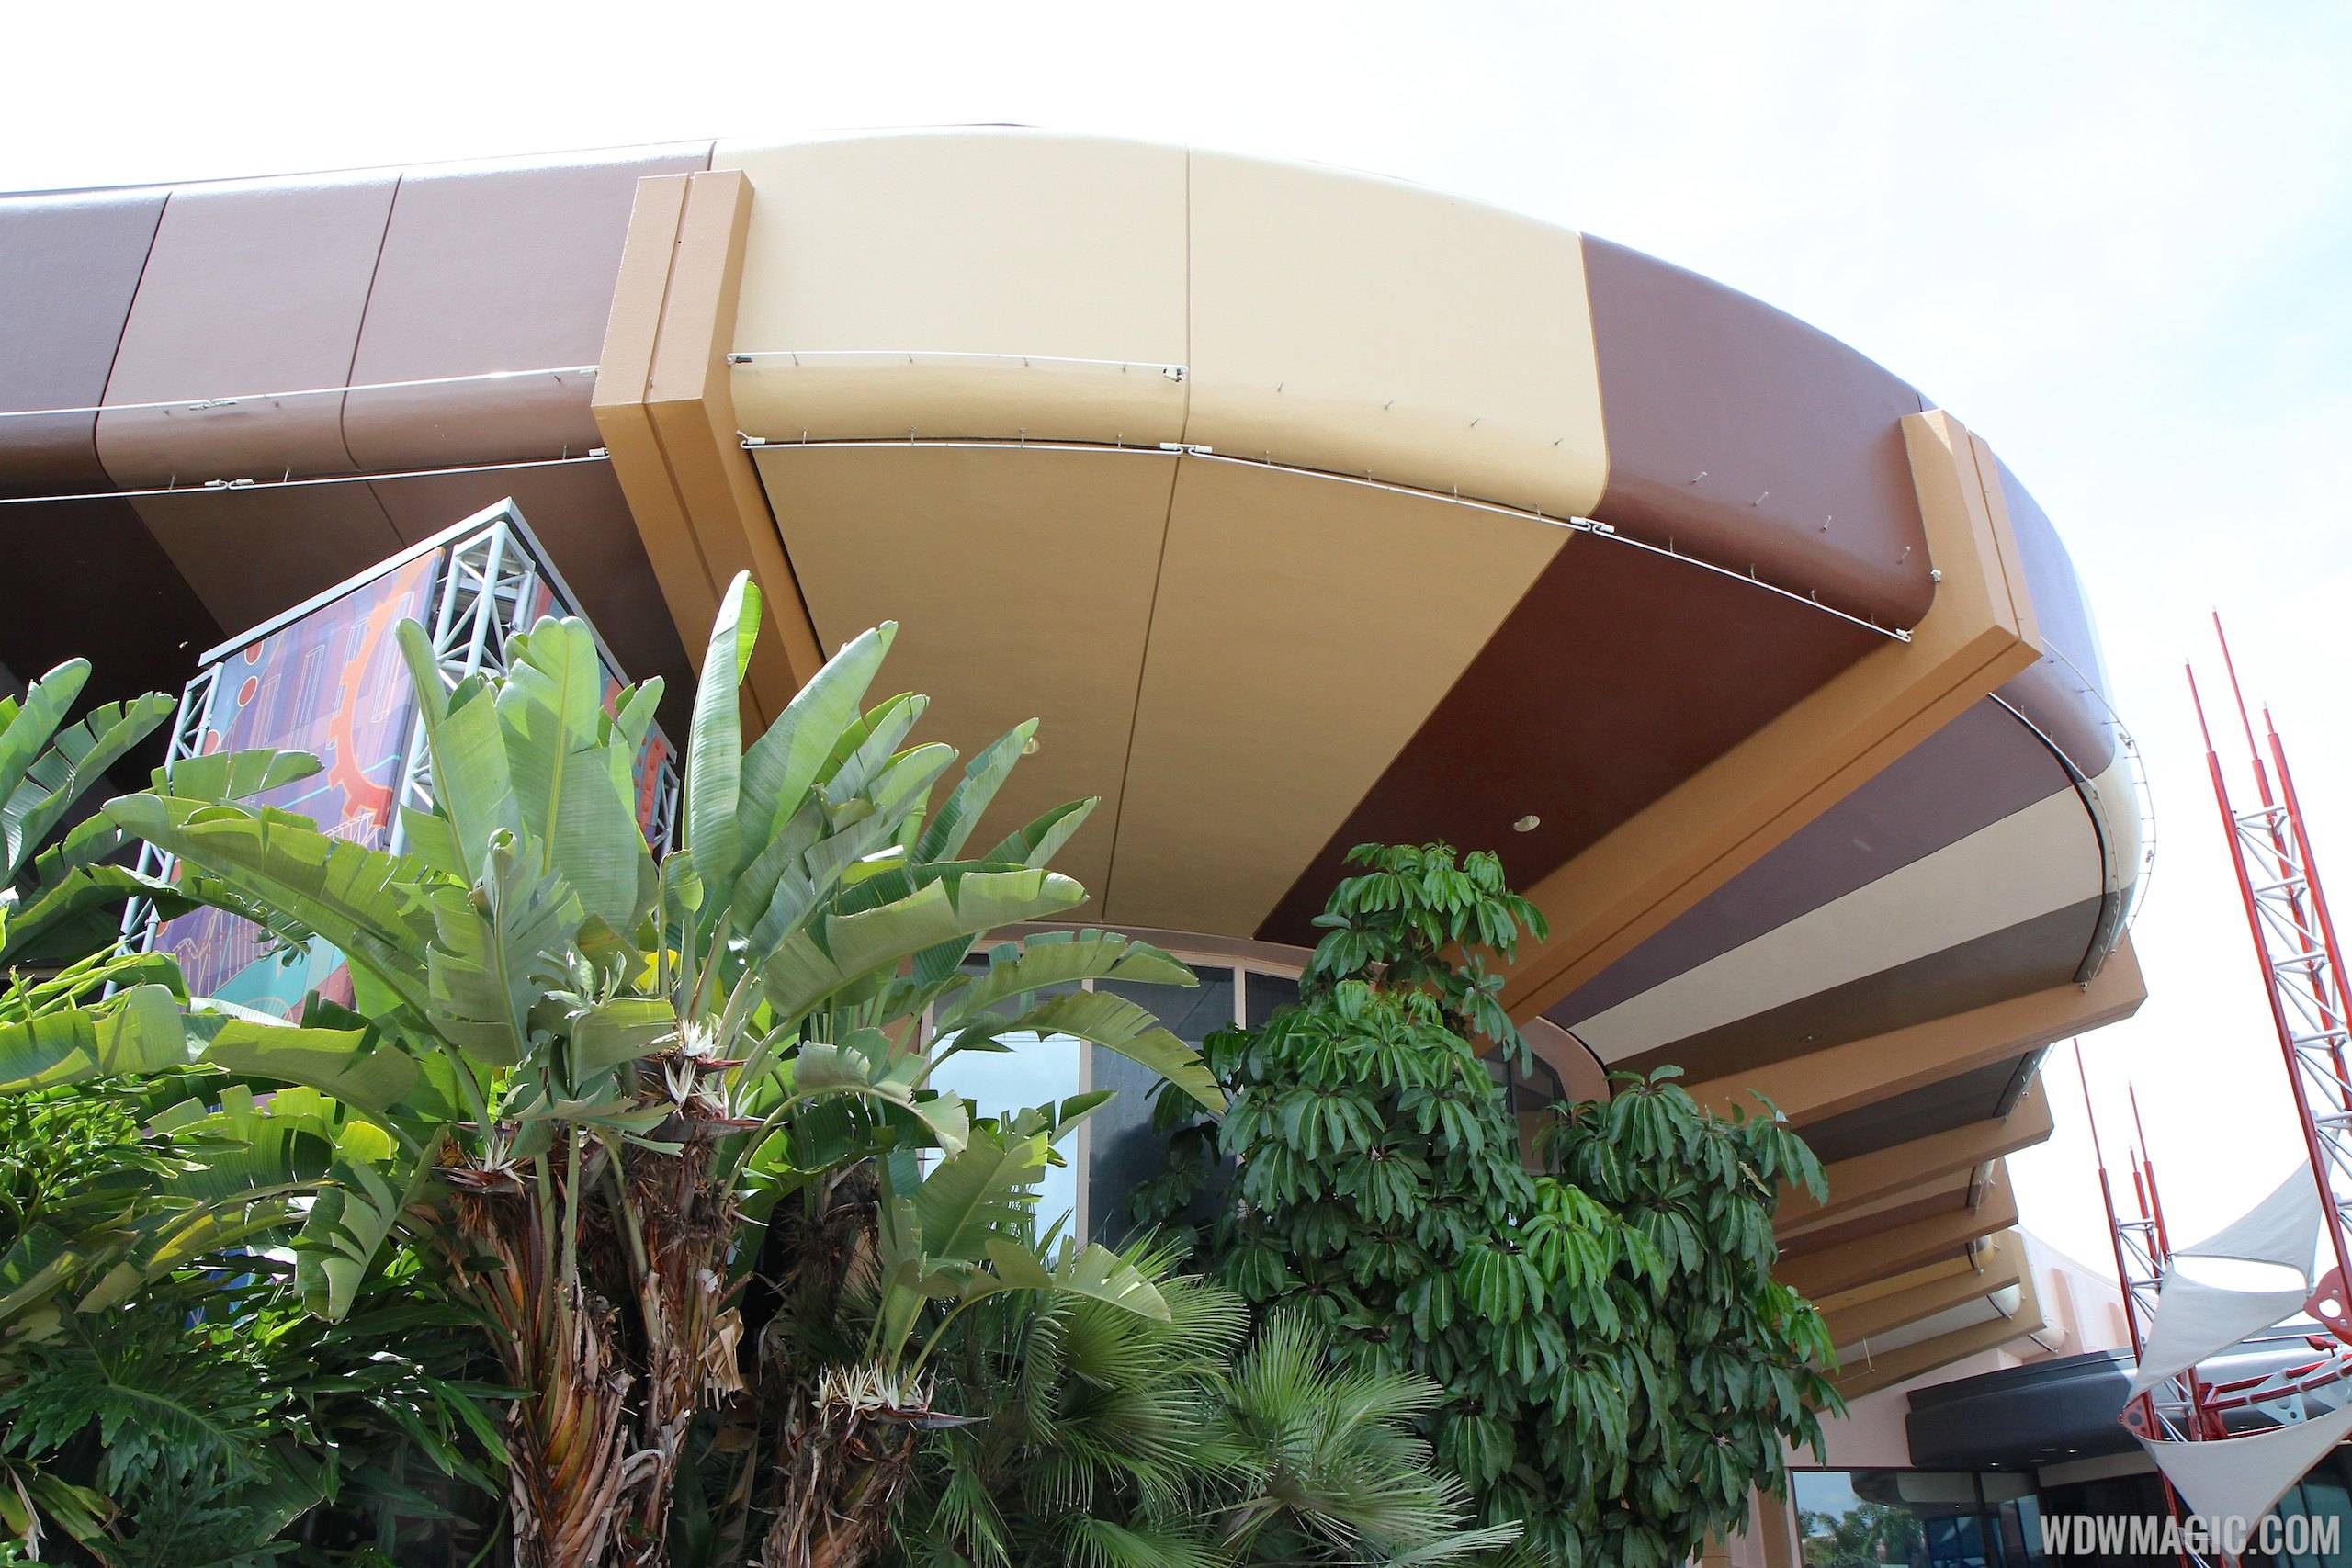 PHOTOS - New paint scheme for the Communicore buildings at Epcot nears half-way complete